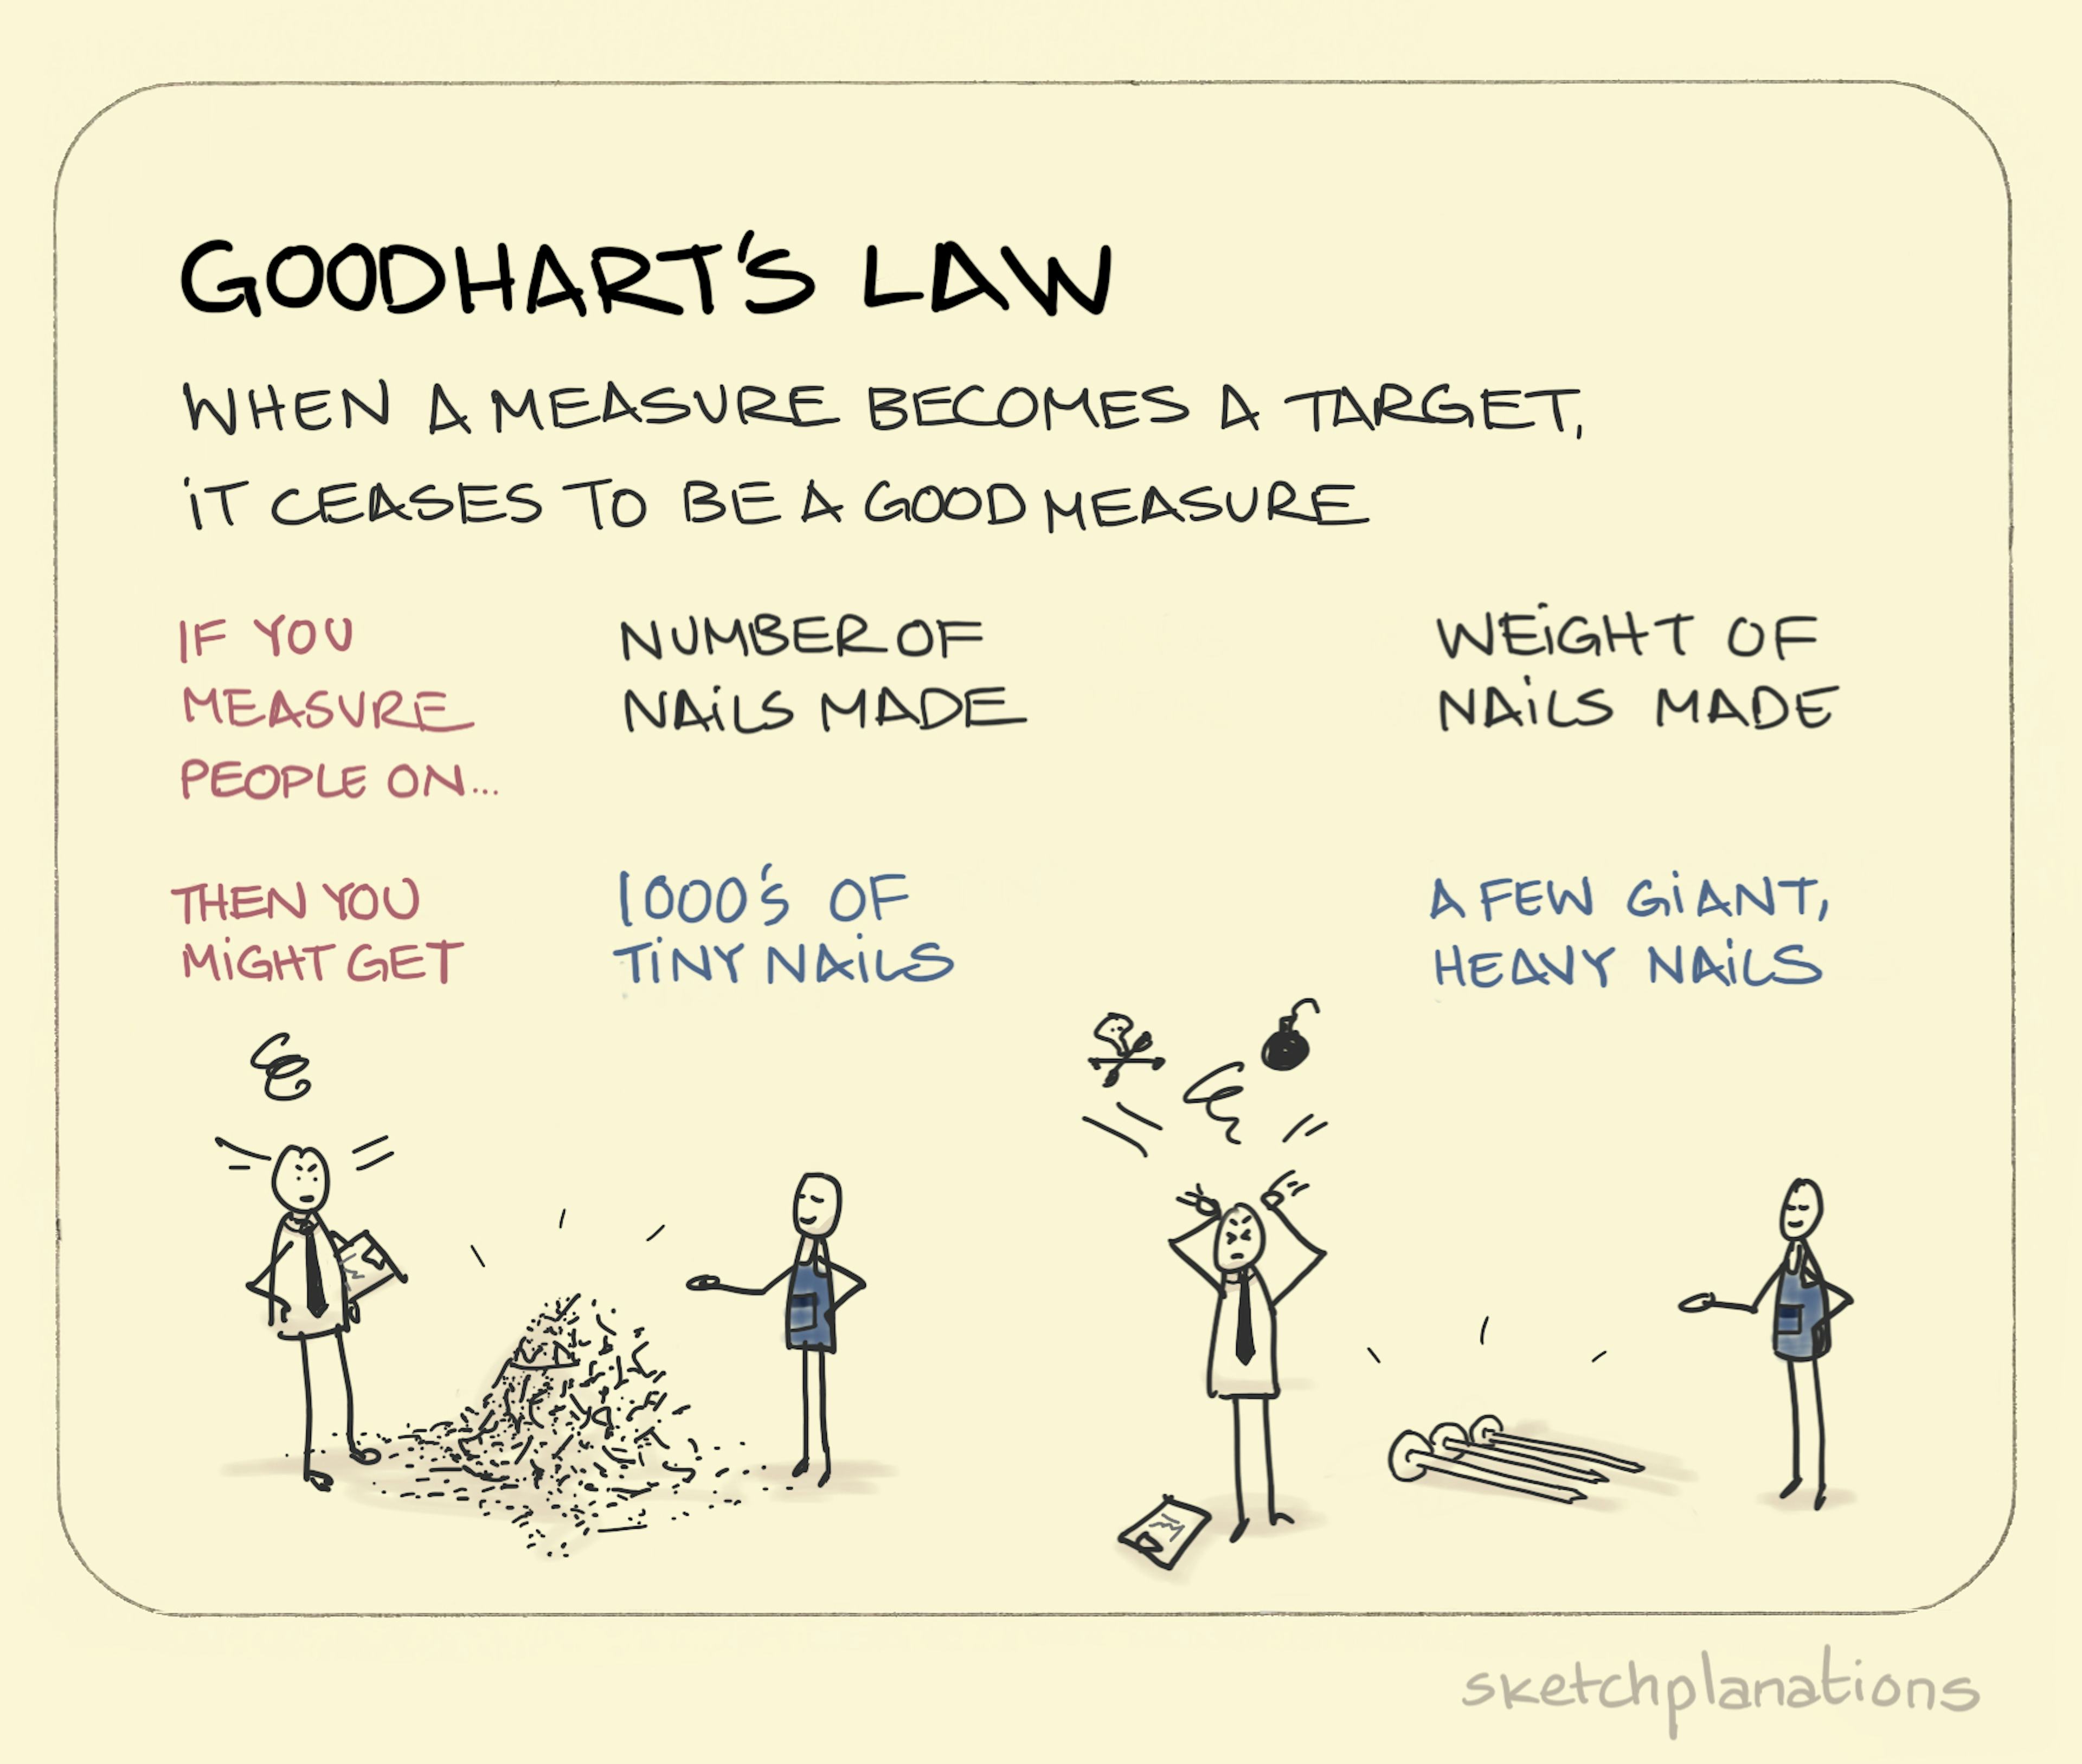 Goodhart's Law: when a measure becomes a target, it cease to be a